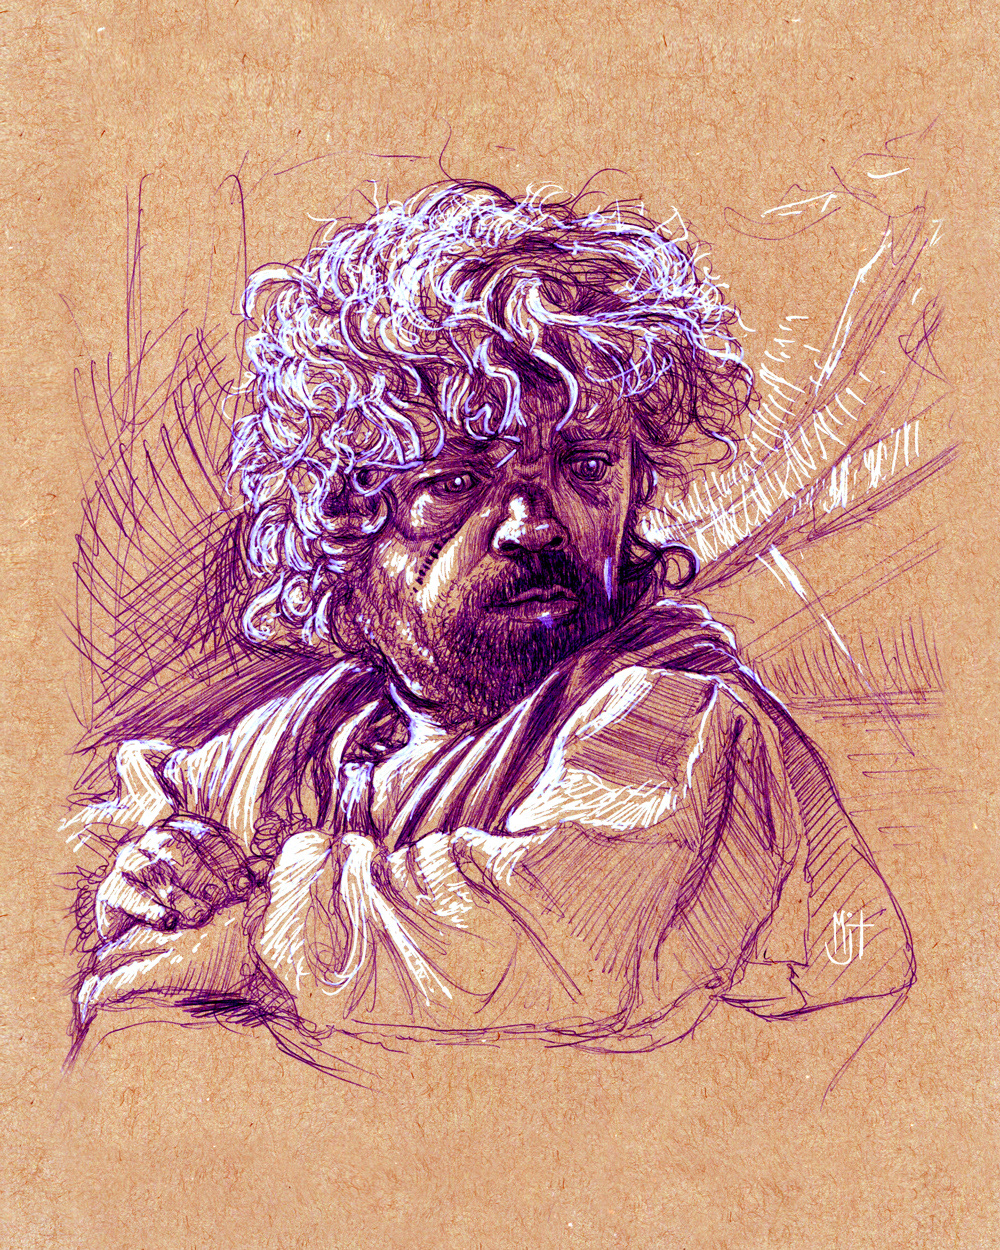 Game of Thrones sketch tyrion lannister tyrion got pen drawing